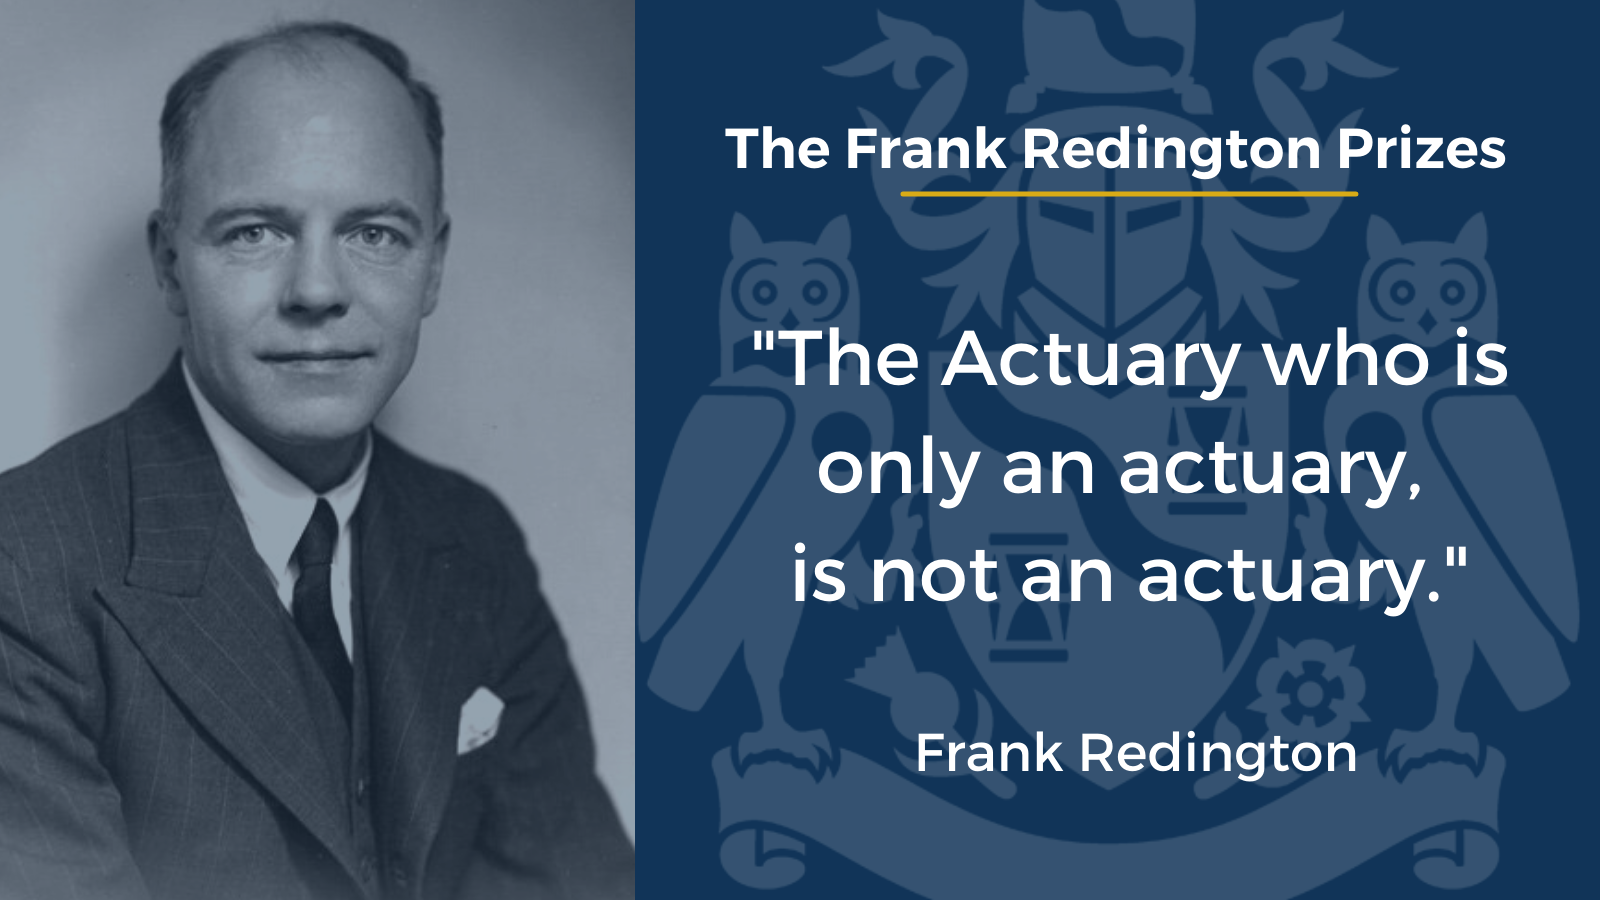 Portrait of Frank Redington with his quote: "The actuary who is only an actuary is not an actuary."